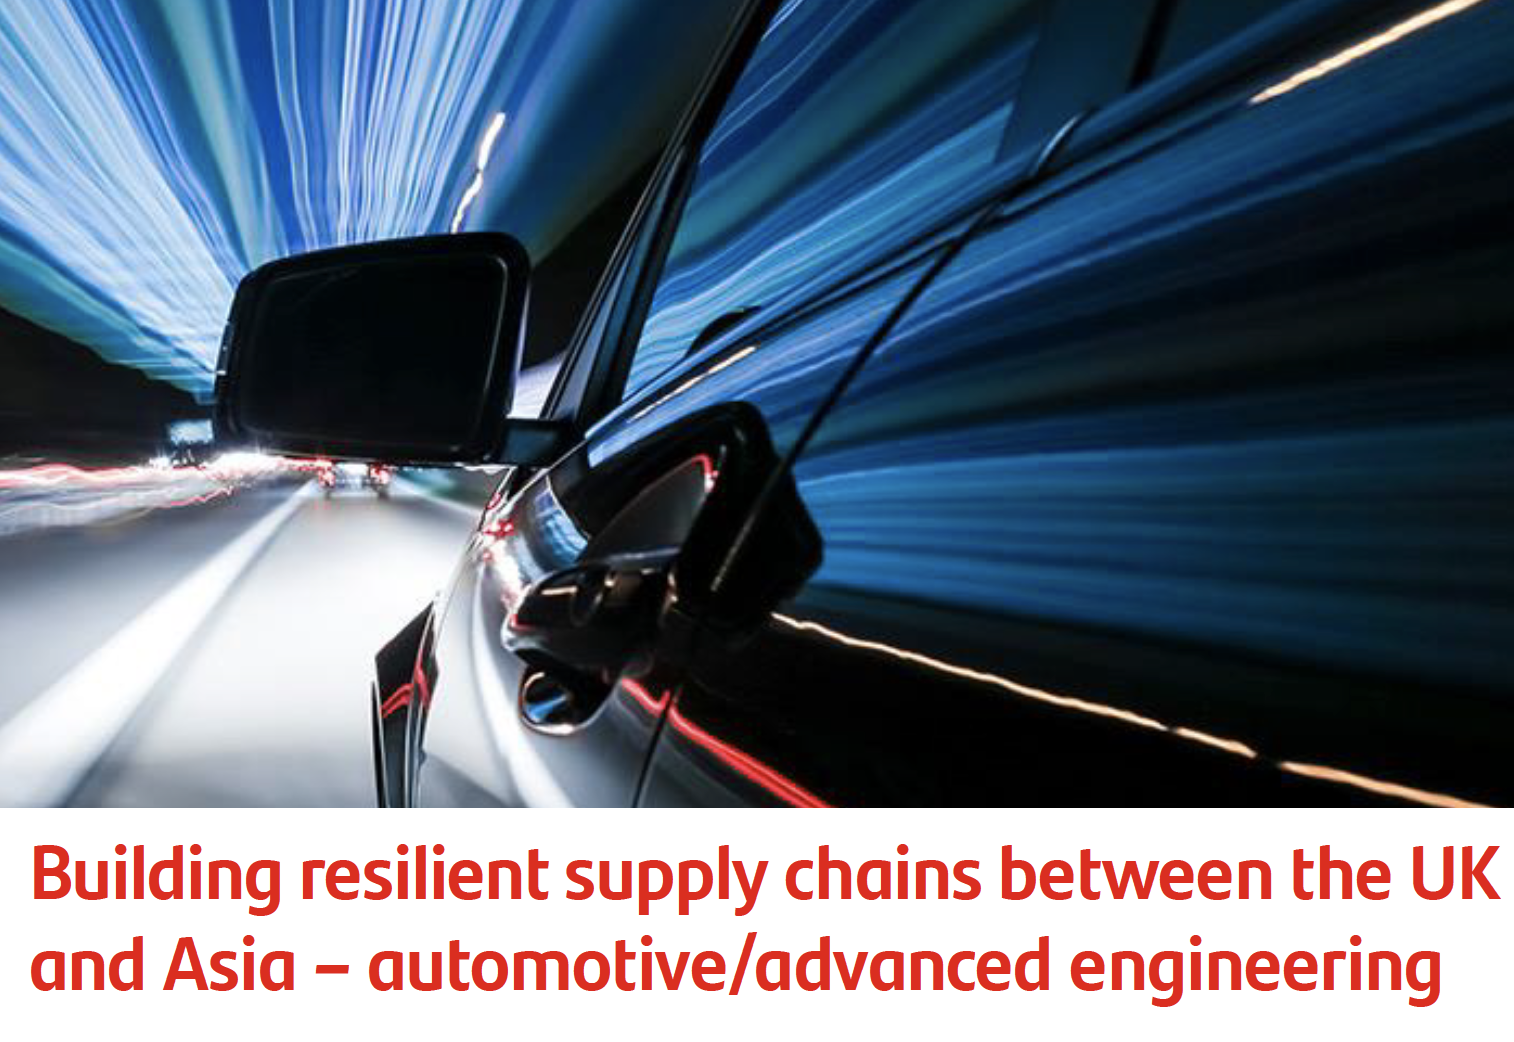 Building resilient supply chains between the UK and Asia – automotive/advanced engineering